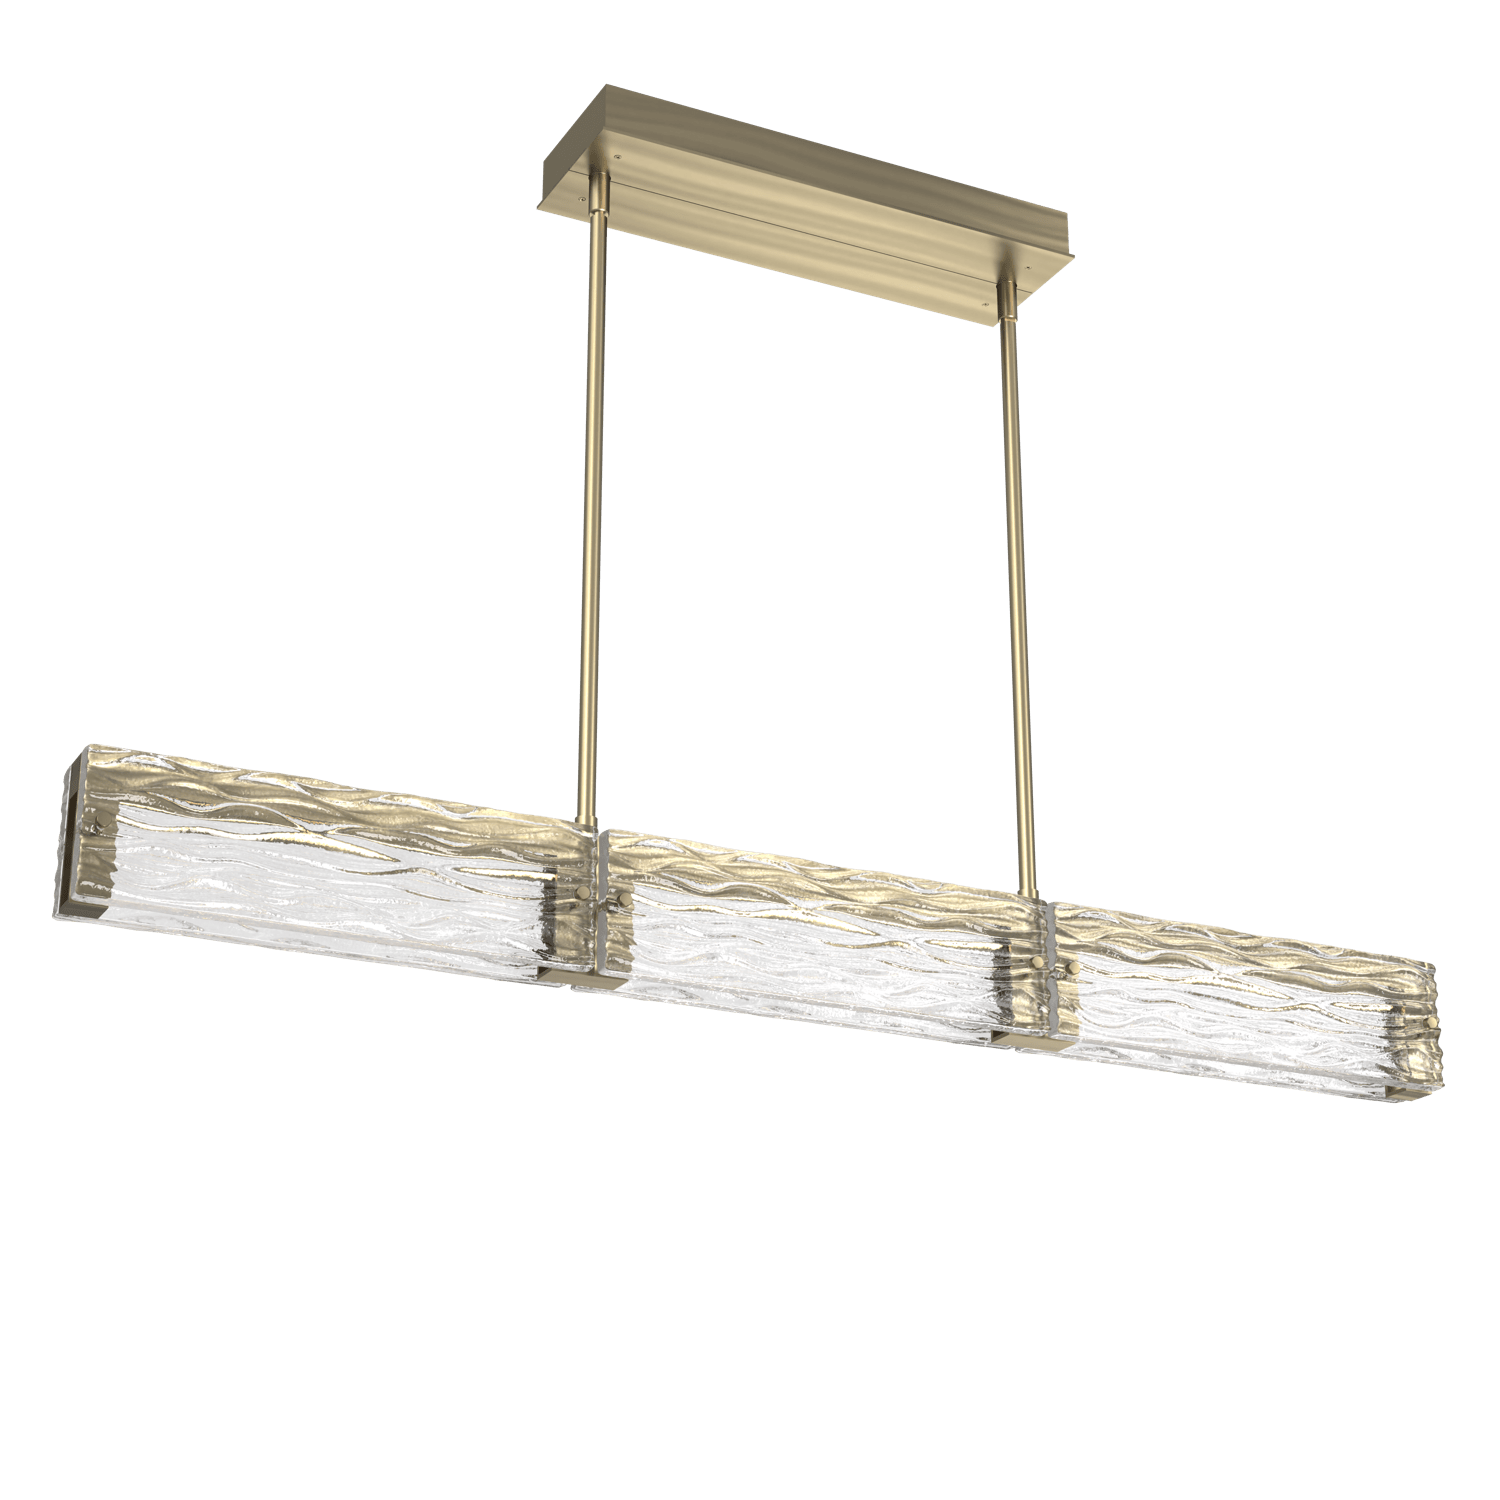 PLB0090-43-HB-TT-Hammerton-Studio-Tabulo-43-inch-linear-chandelier-with-heritage-brass-finish-and-clear-tidal-cast-glass-shade-and-LED-lamping